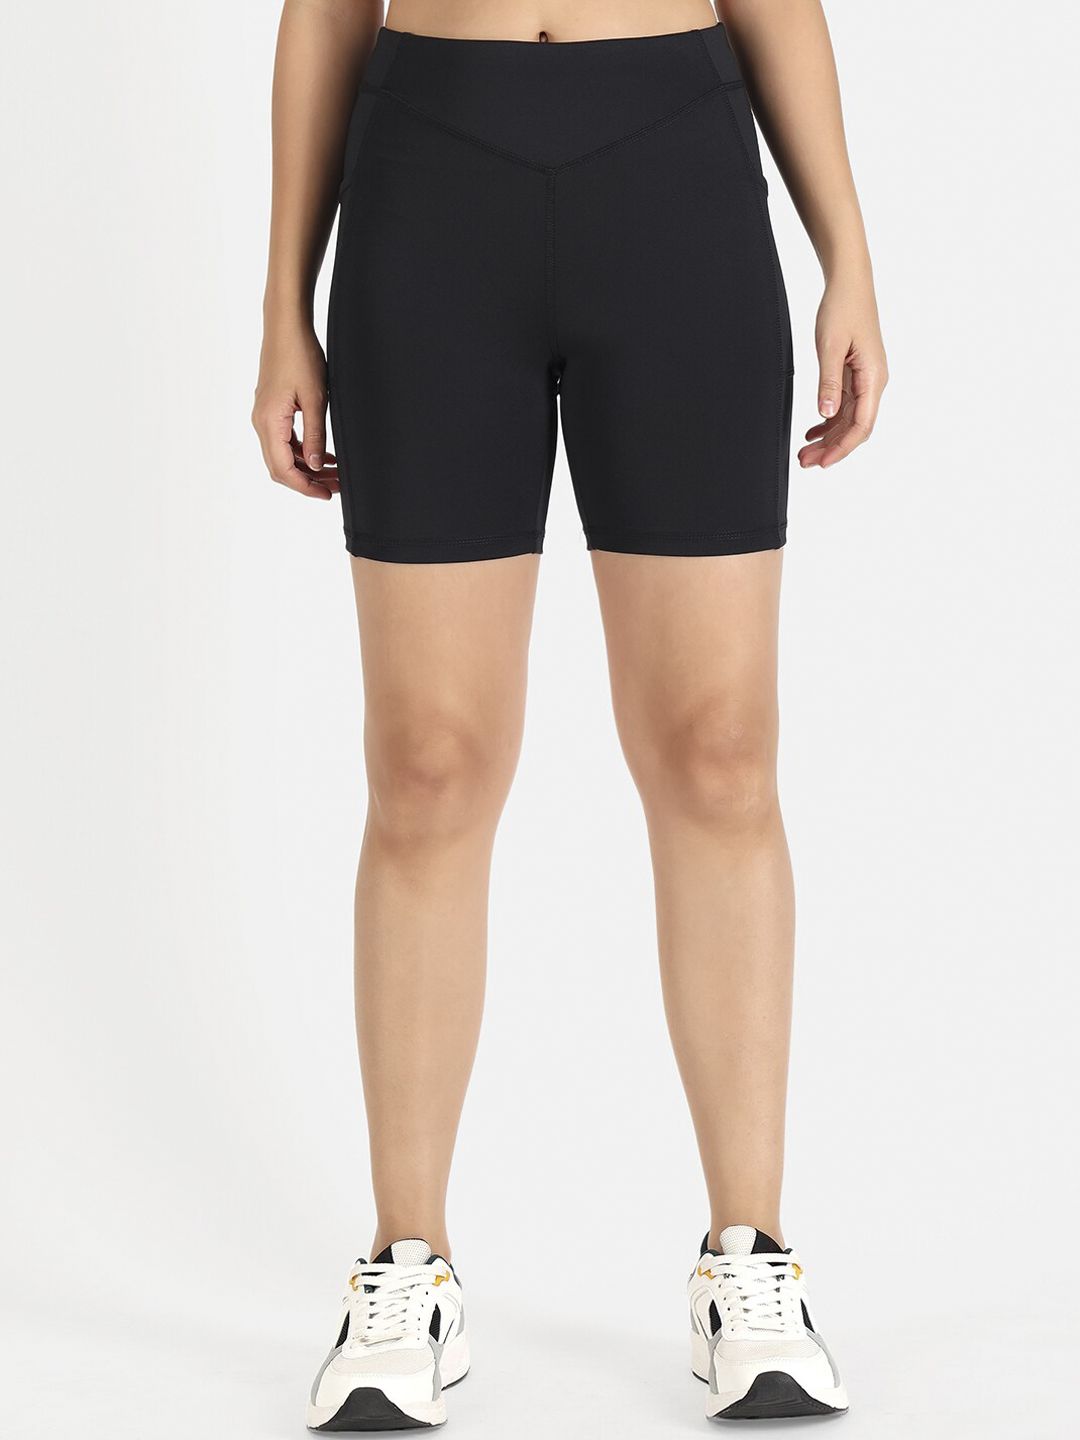 ATHLISIS Women Black Skinny Fit Sports Shorts Price in India